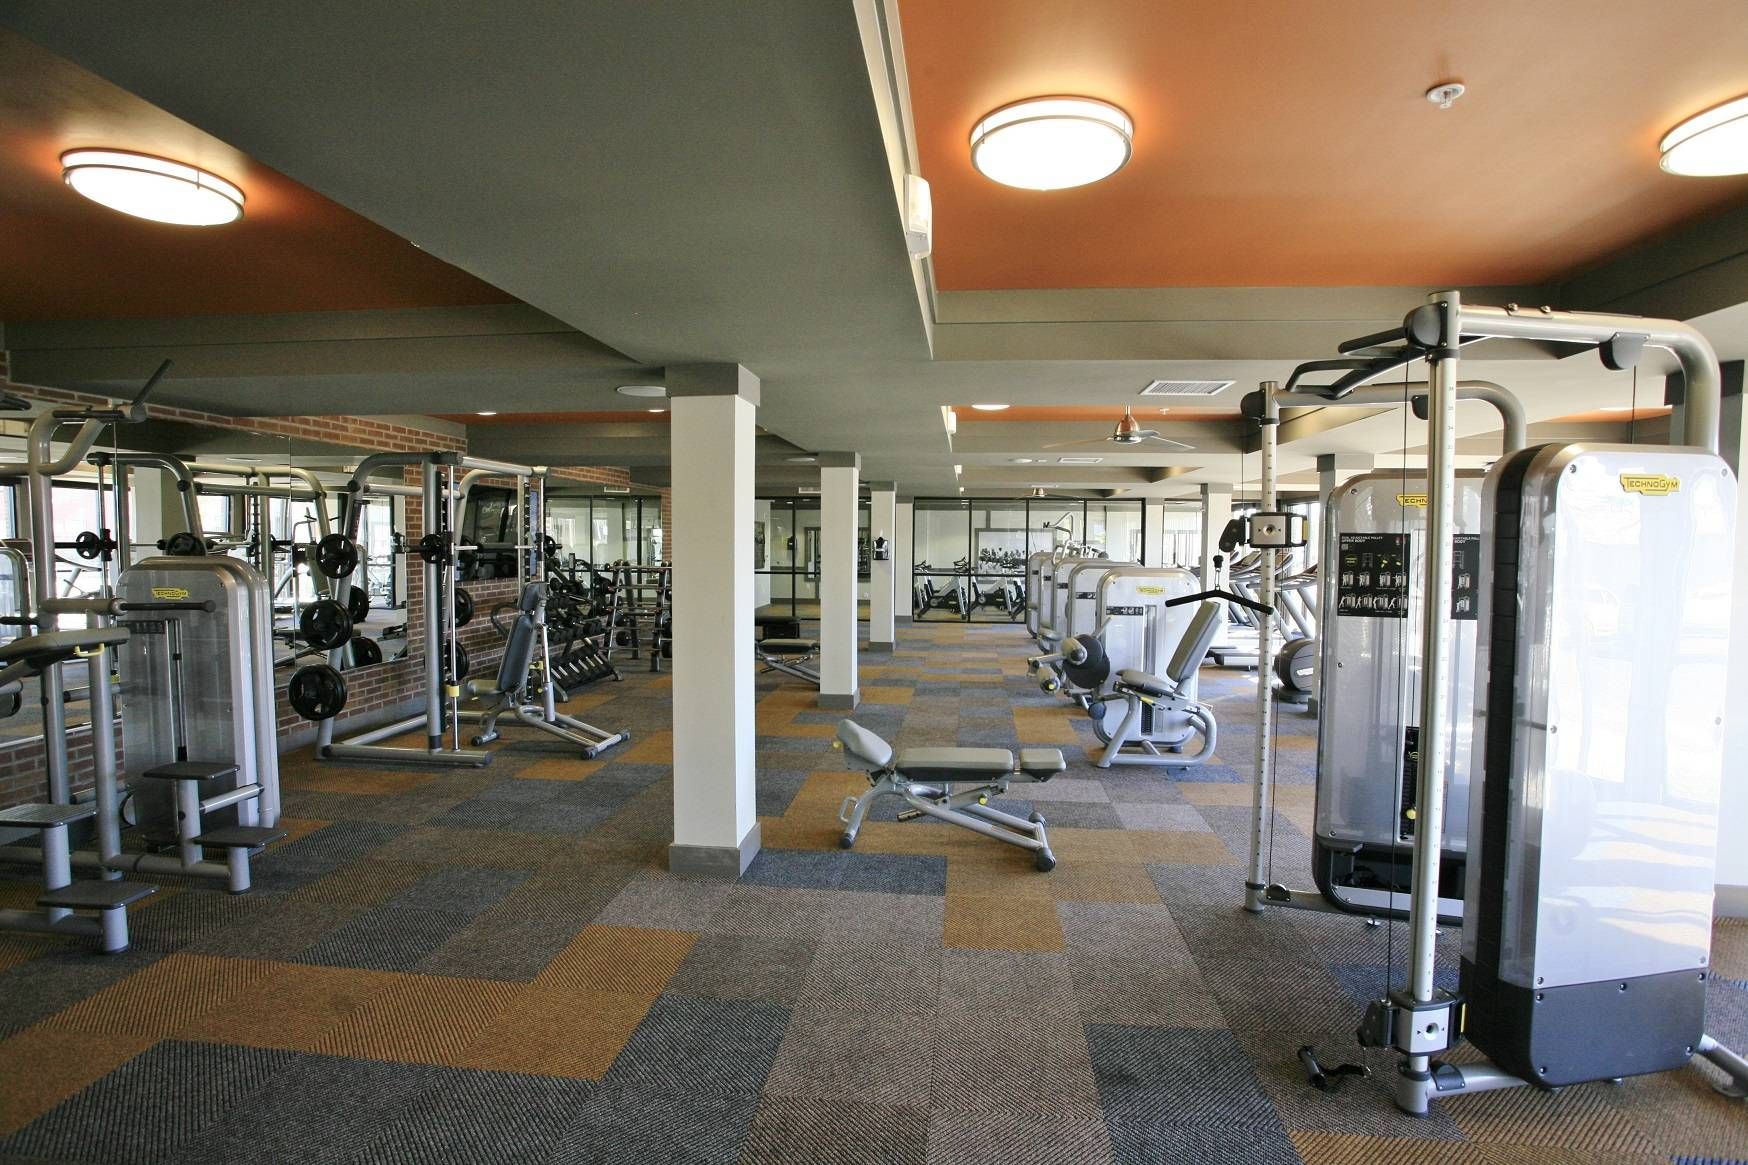 Spacious gym at Alta Steelyard Lofts featuring a range of modern fitness equipment and brick accents.